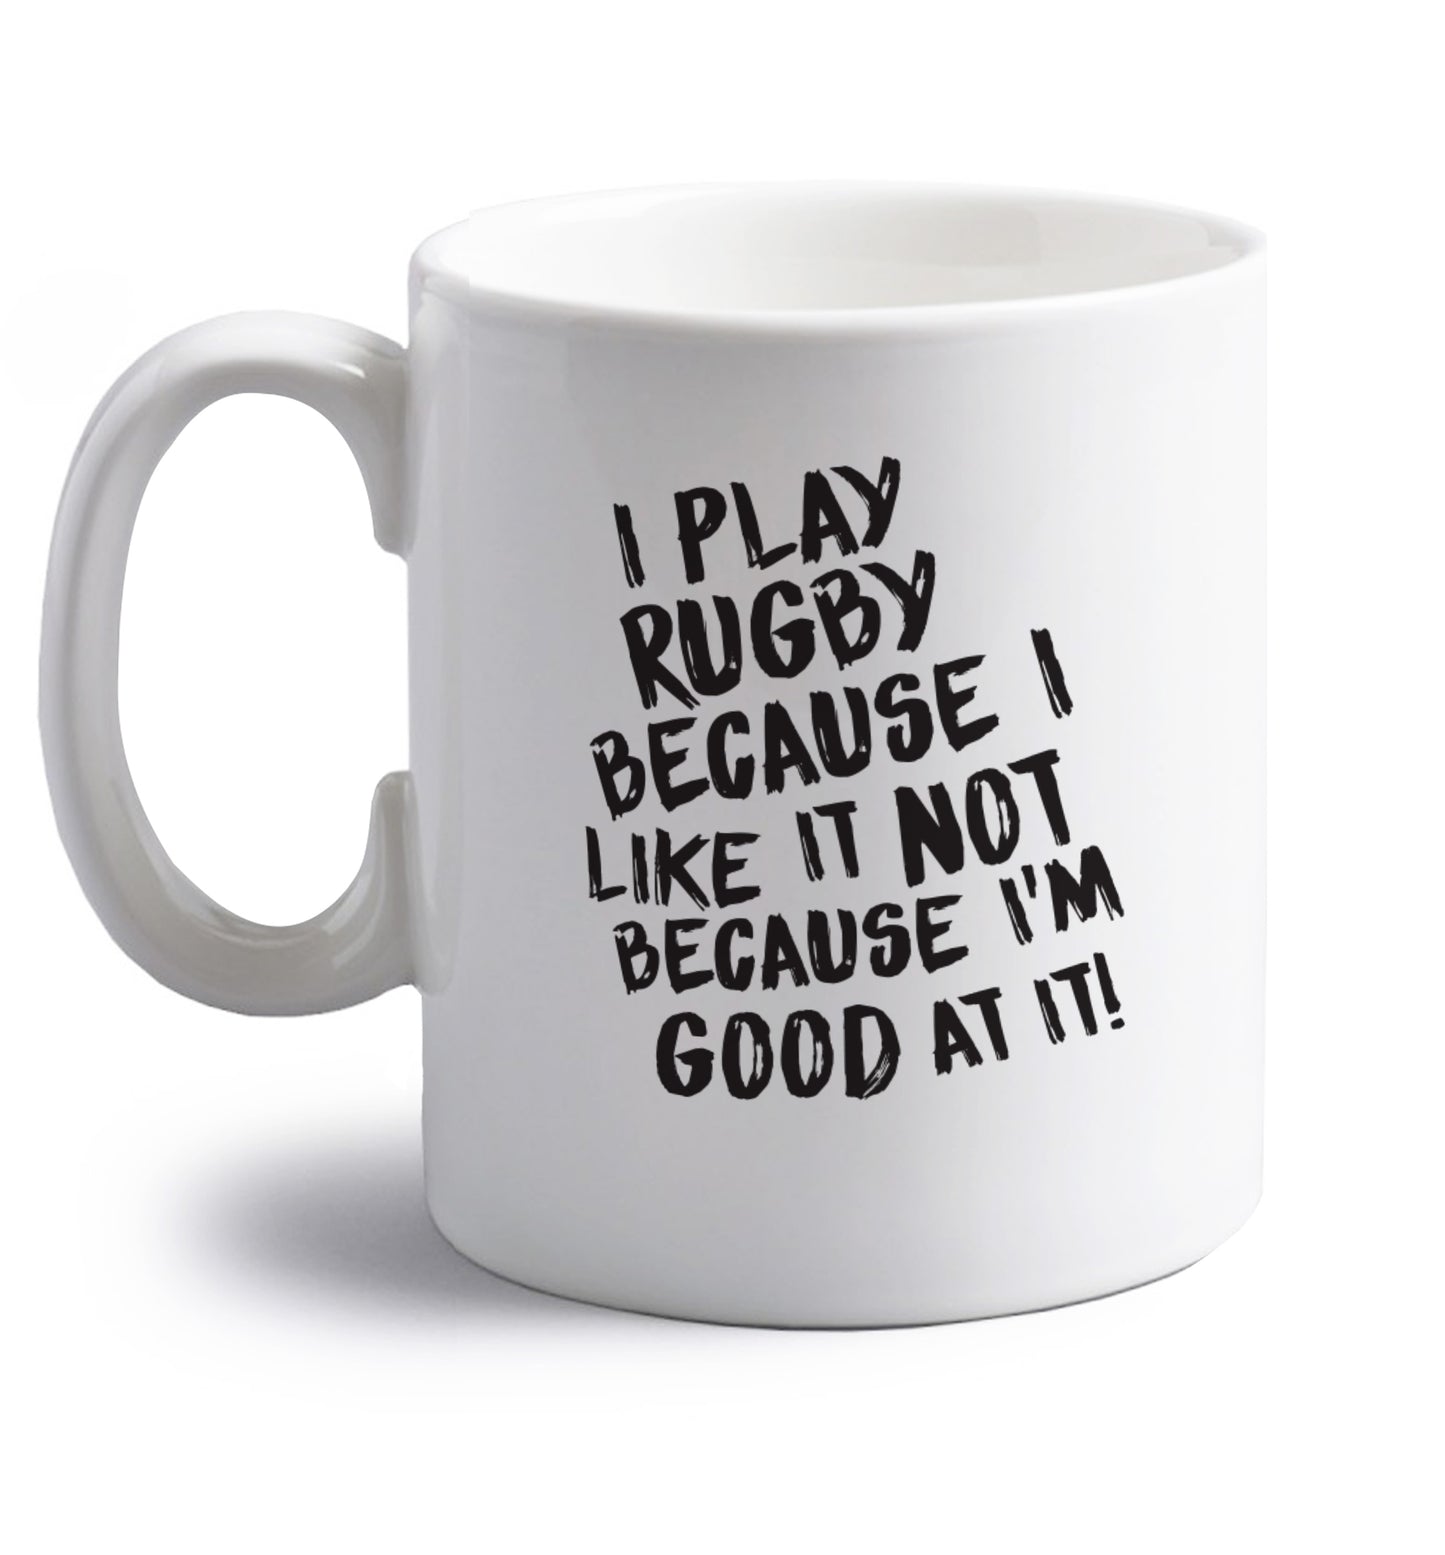 I play rugby because I like it not because I'm good at it right handed white ceramic mug 